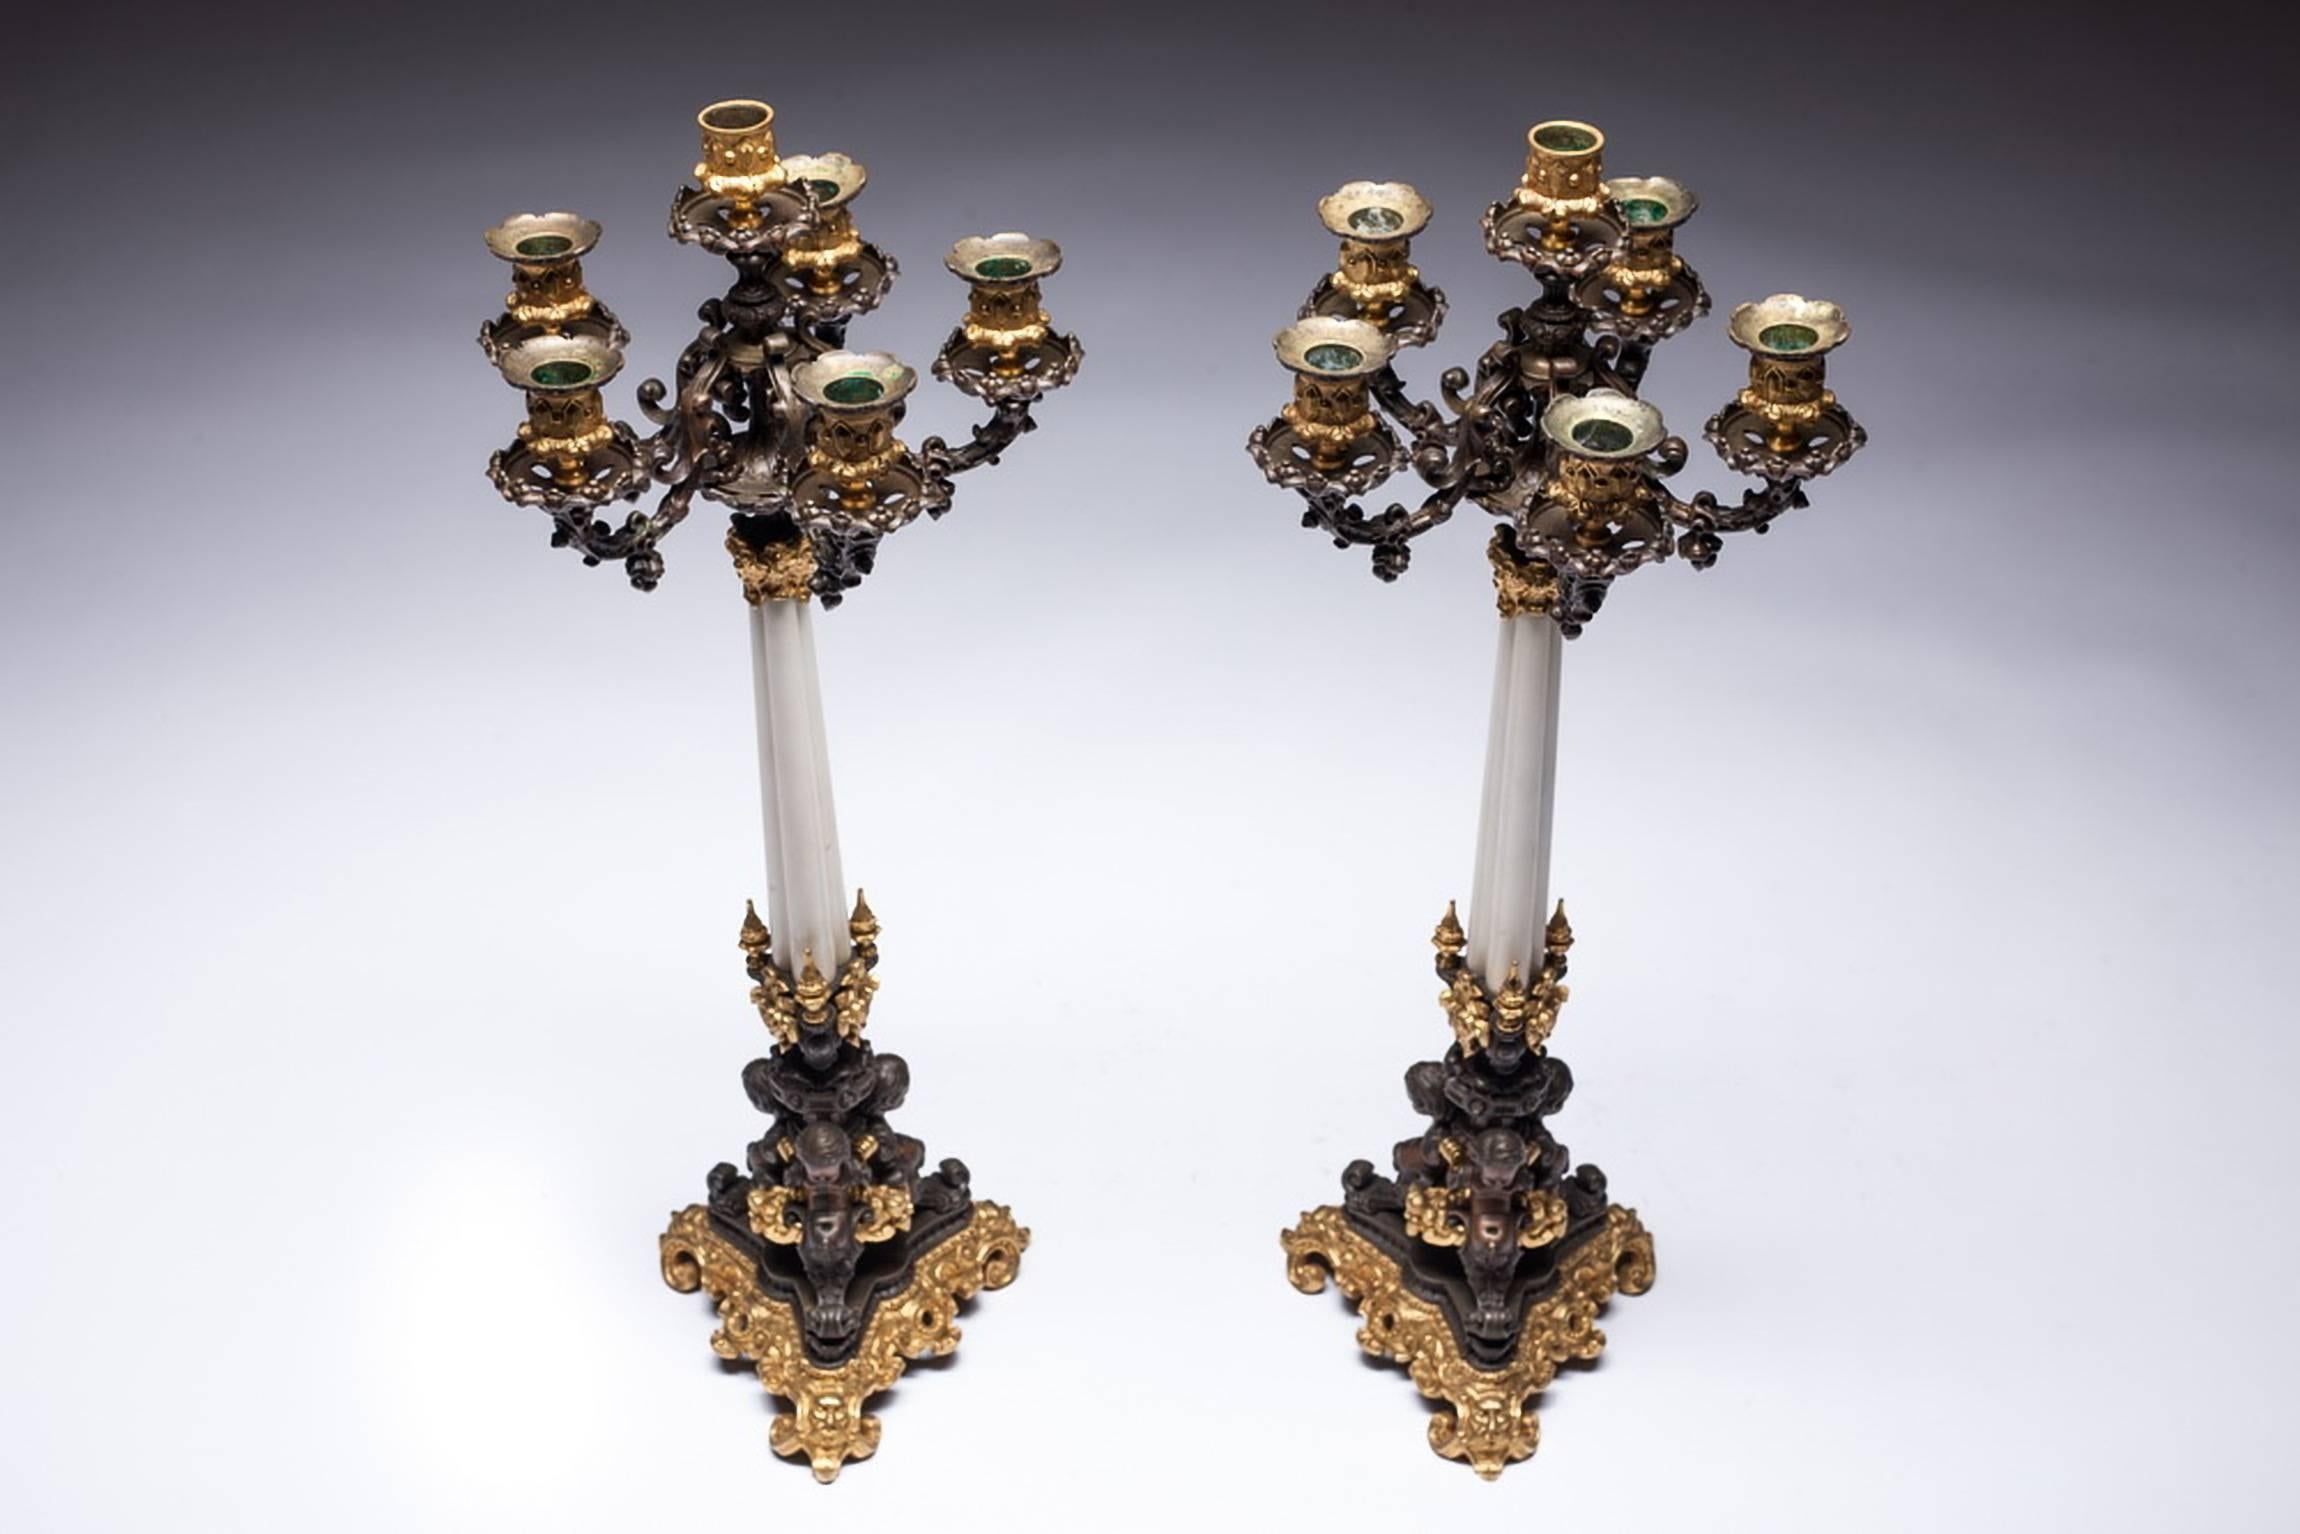 Pair of 19th Century French Empire Bronze and Ormolu Candelabra In Excellent Condition For Sale In Vilnius, LT